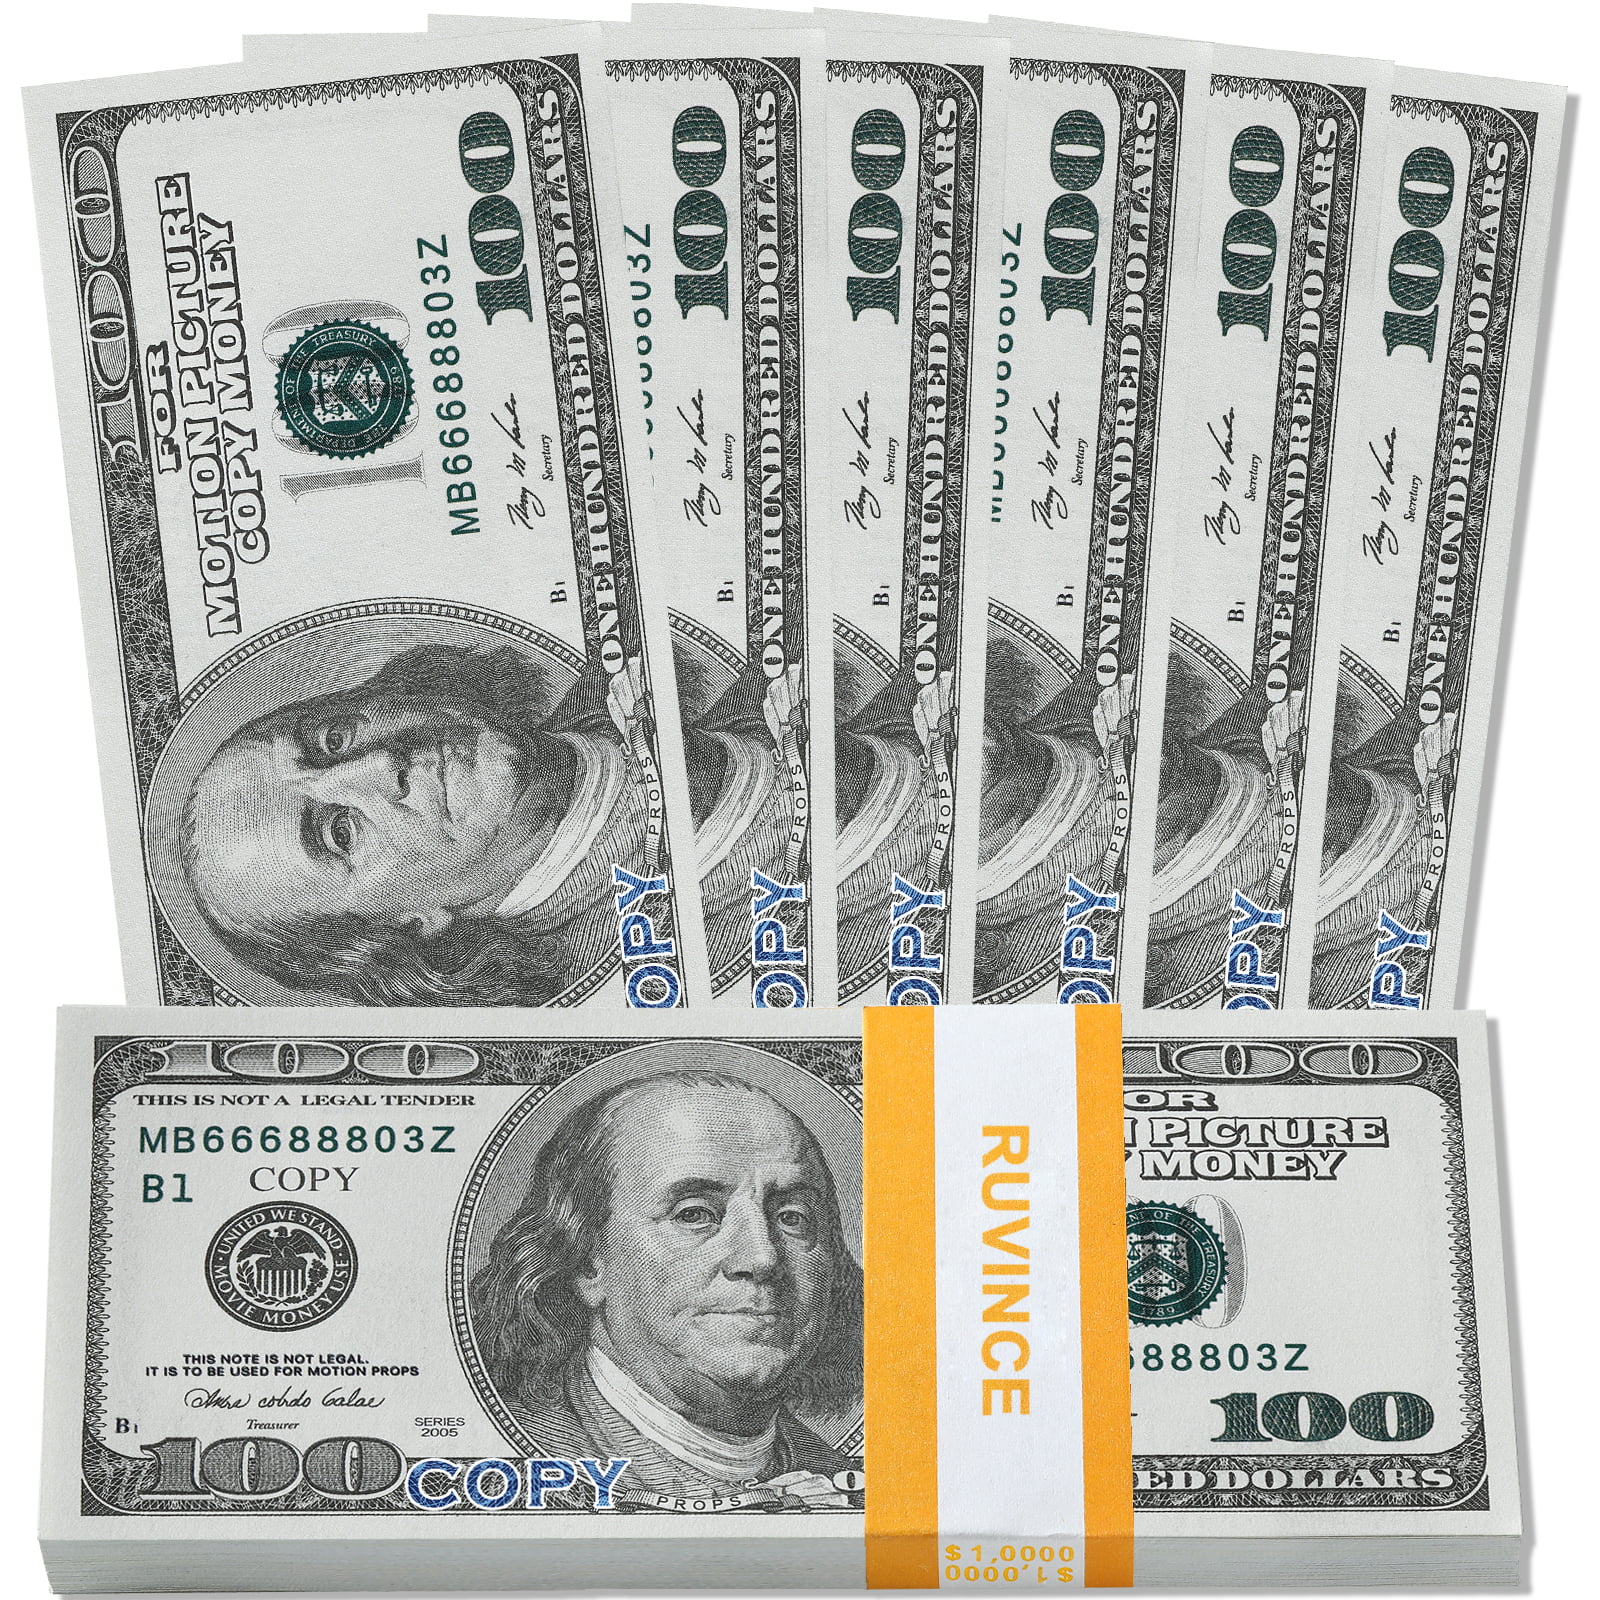 Details about   Pokemon Million Dollar Bill Play Funny Money Novelty Note with FREE SLEEVE 